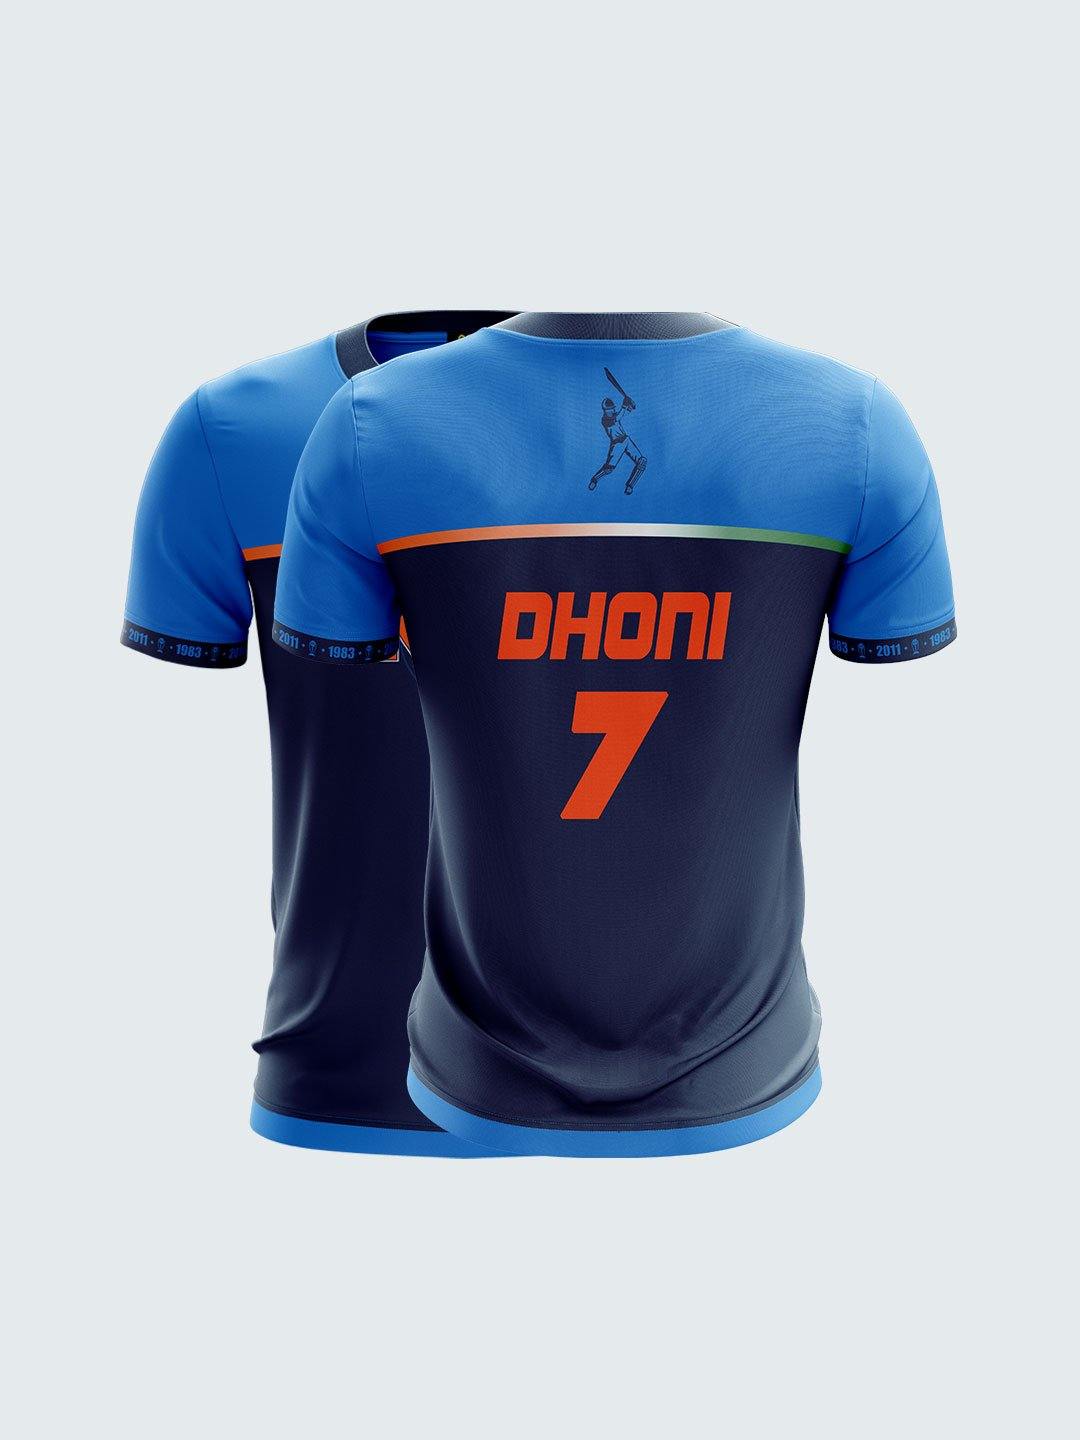 buy dhoni india jersey